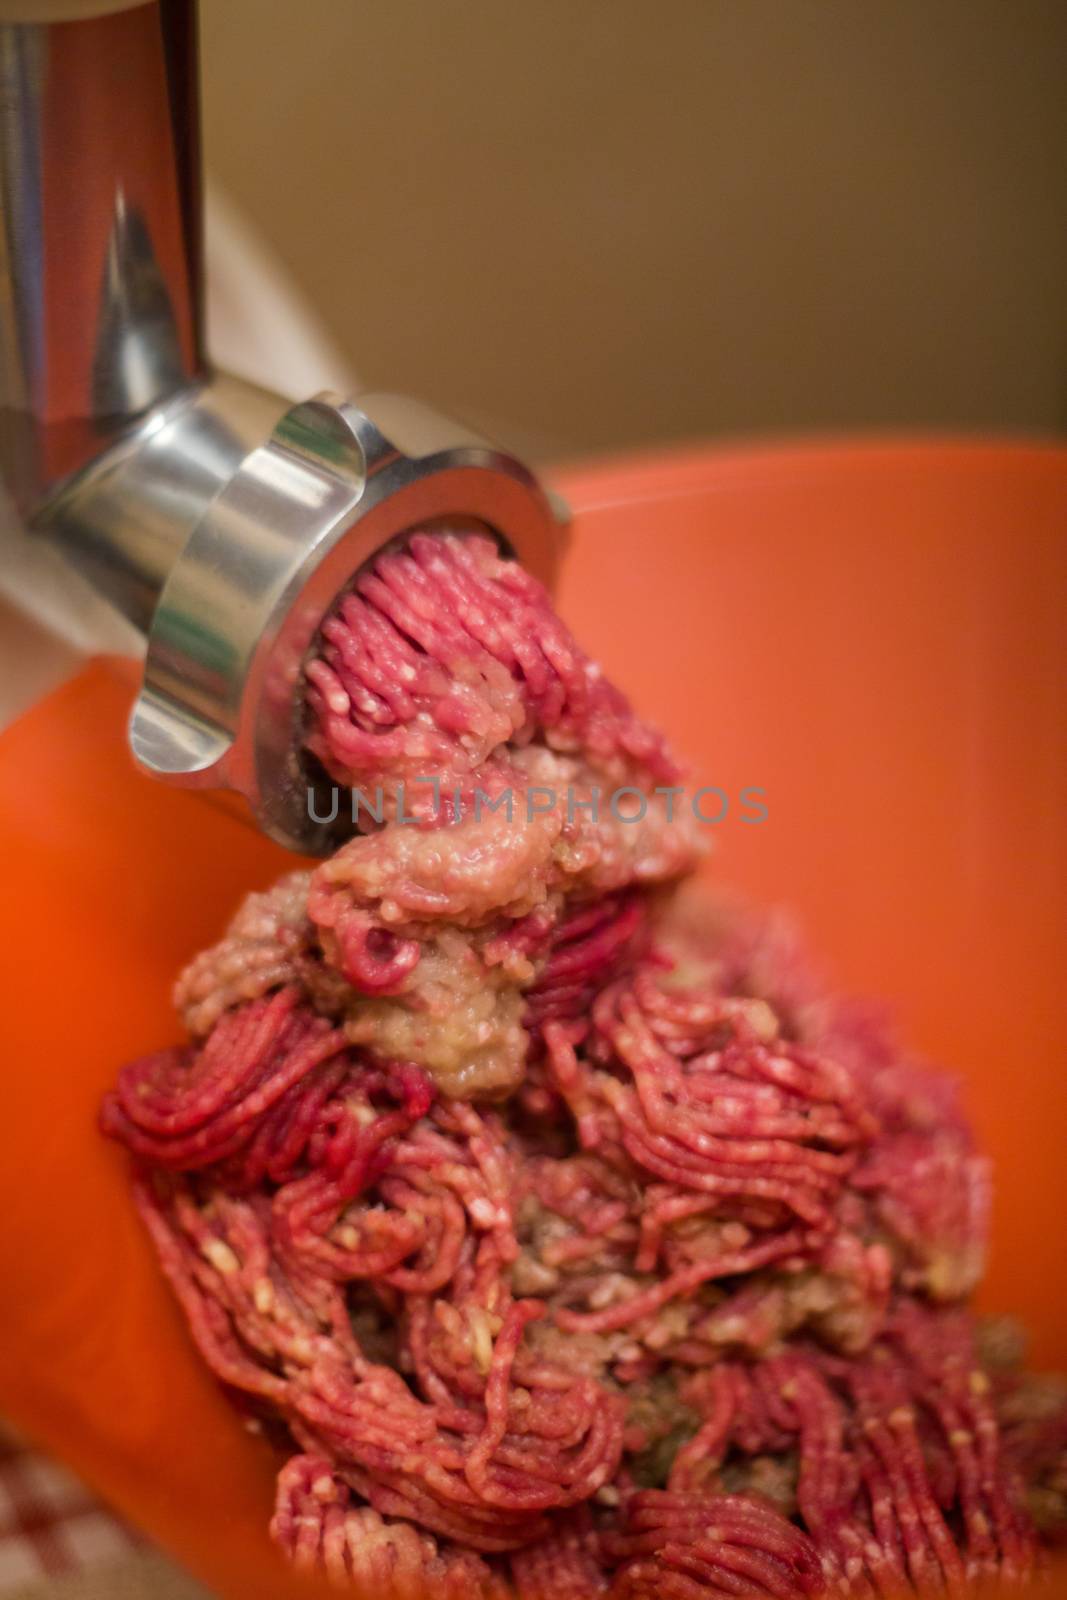 Meat grinder with mince meat by destillat